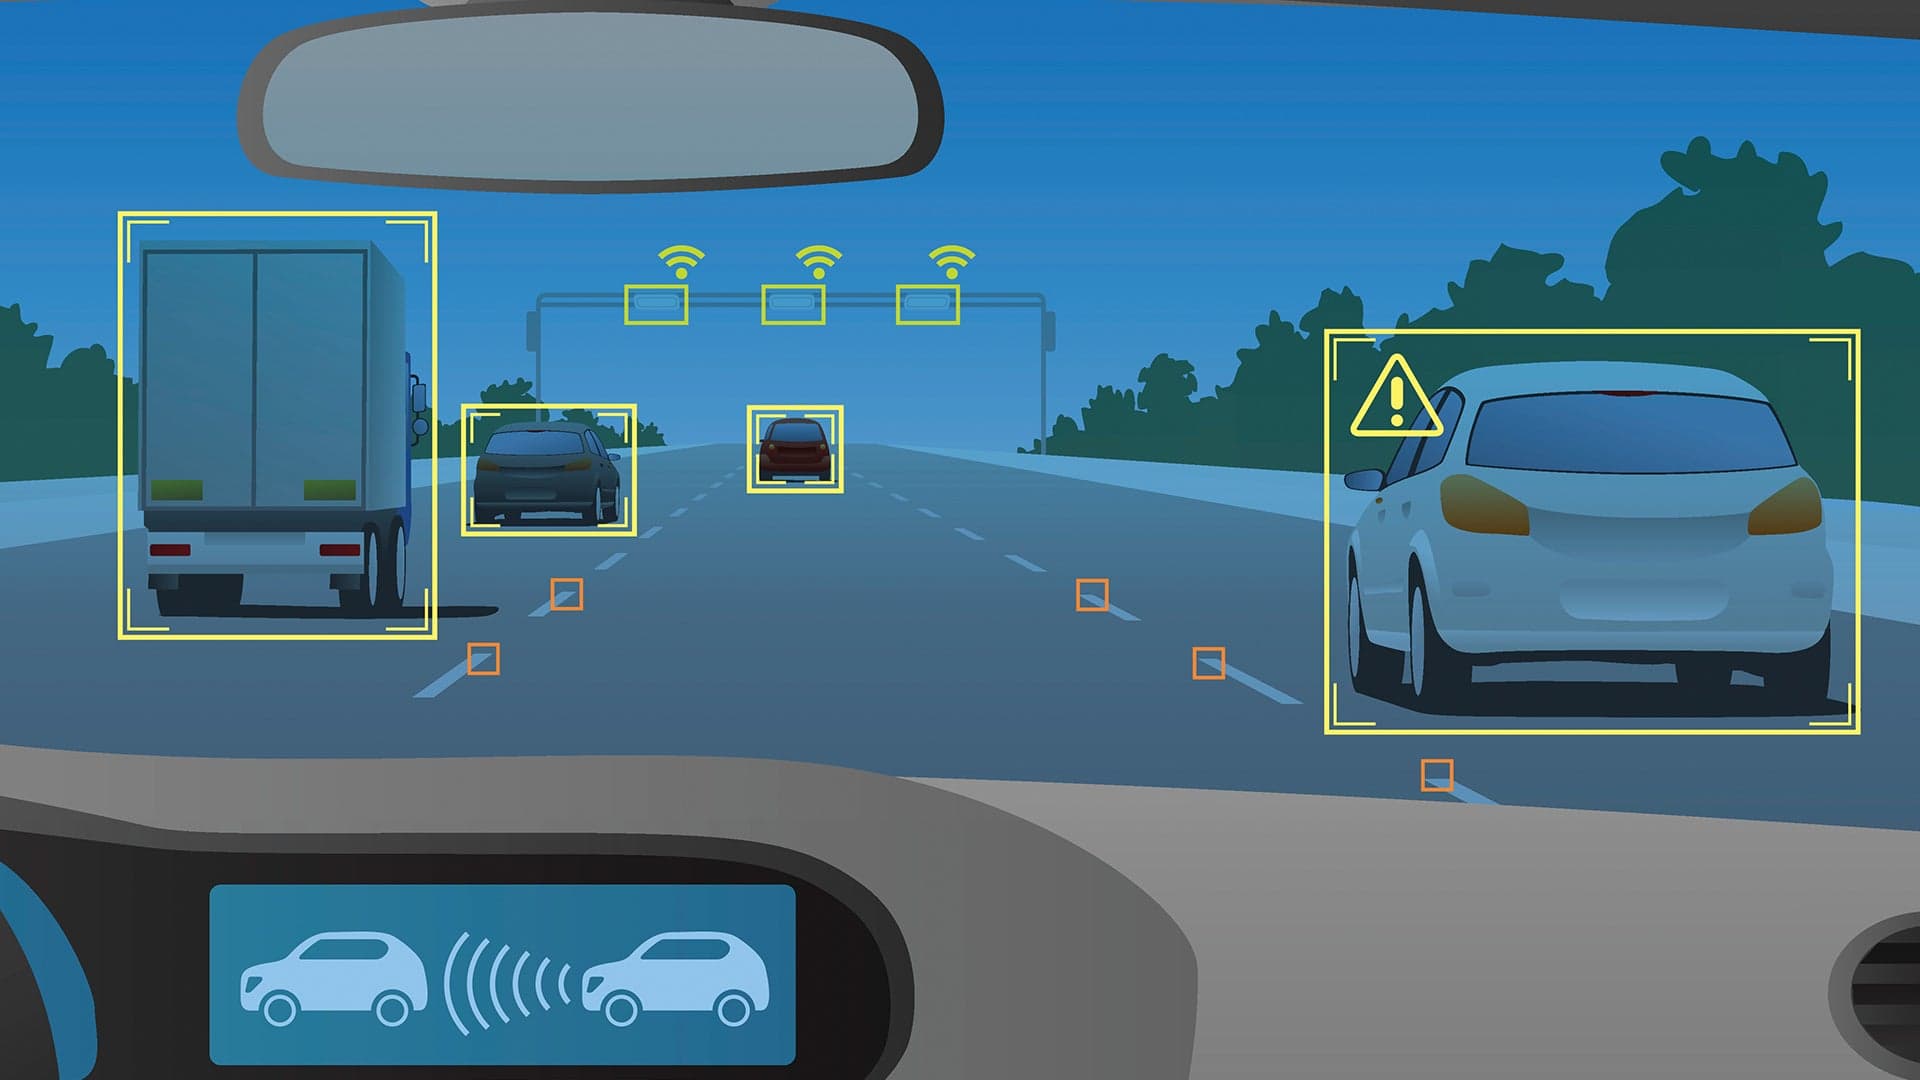 Here’s How The Sensors in Autonomous Cars Work